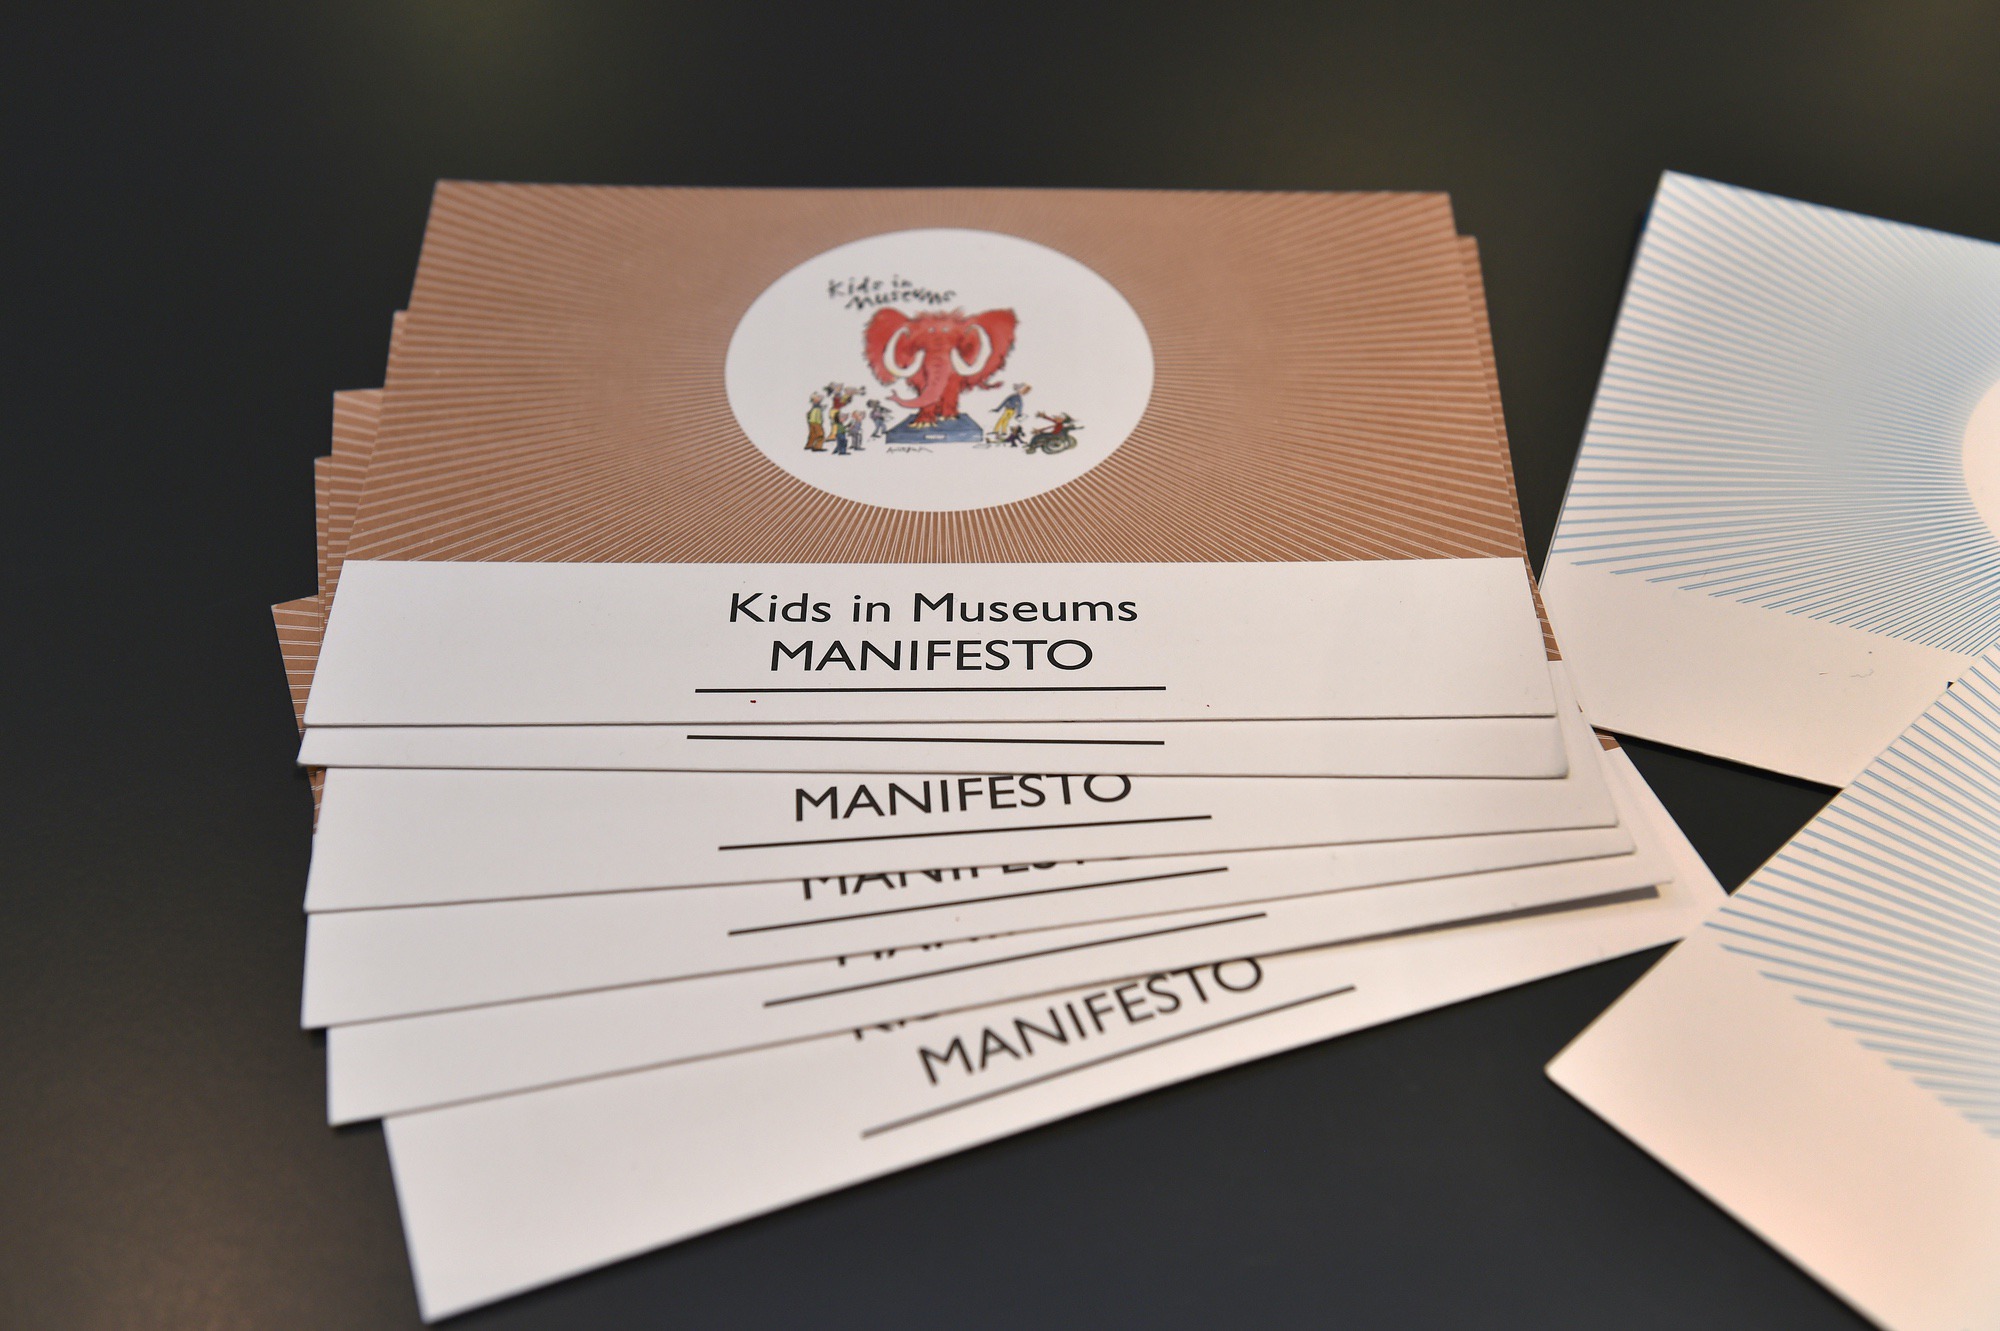 A pile of paper copies of the Kids in Museums Manifesto lying on a table.